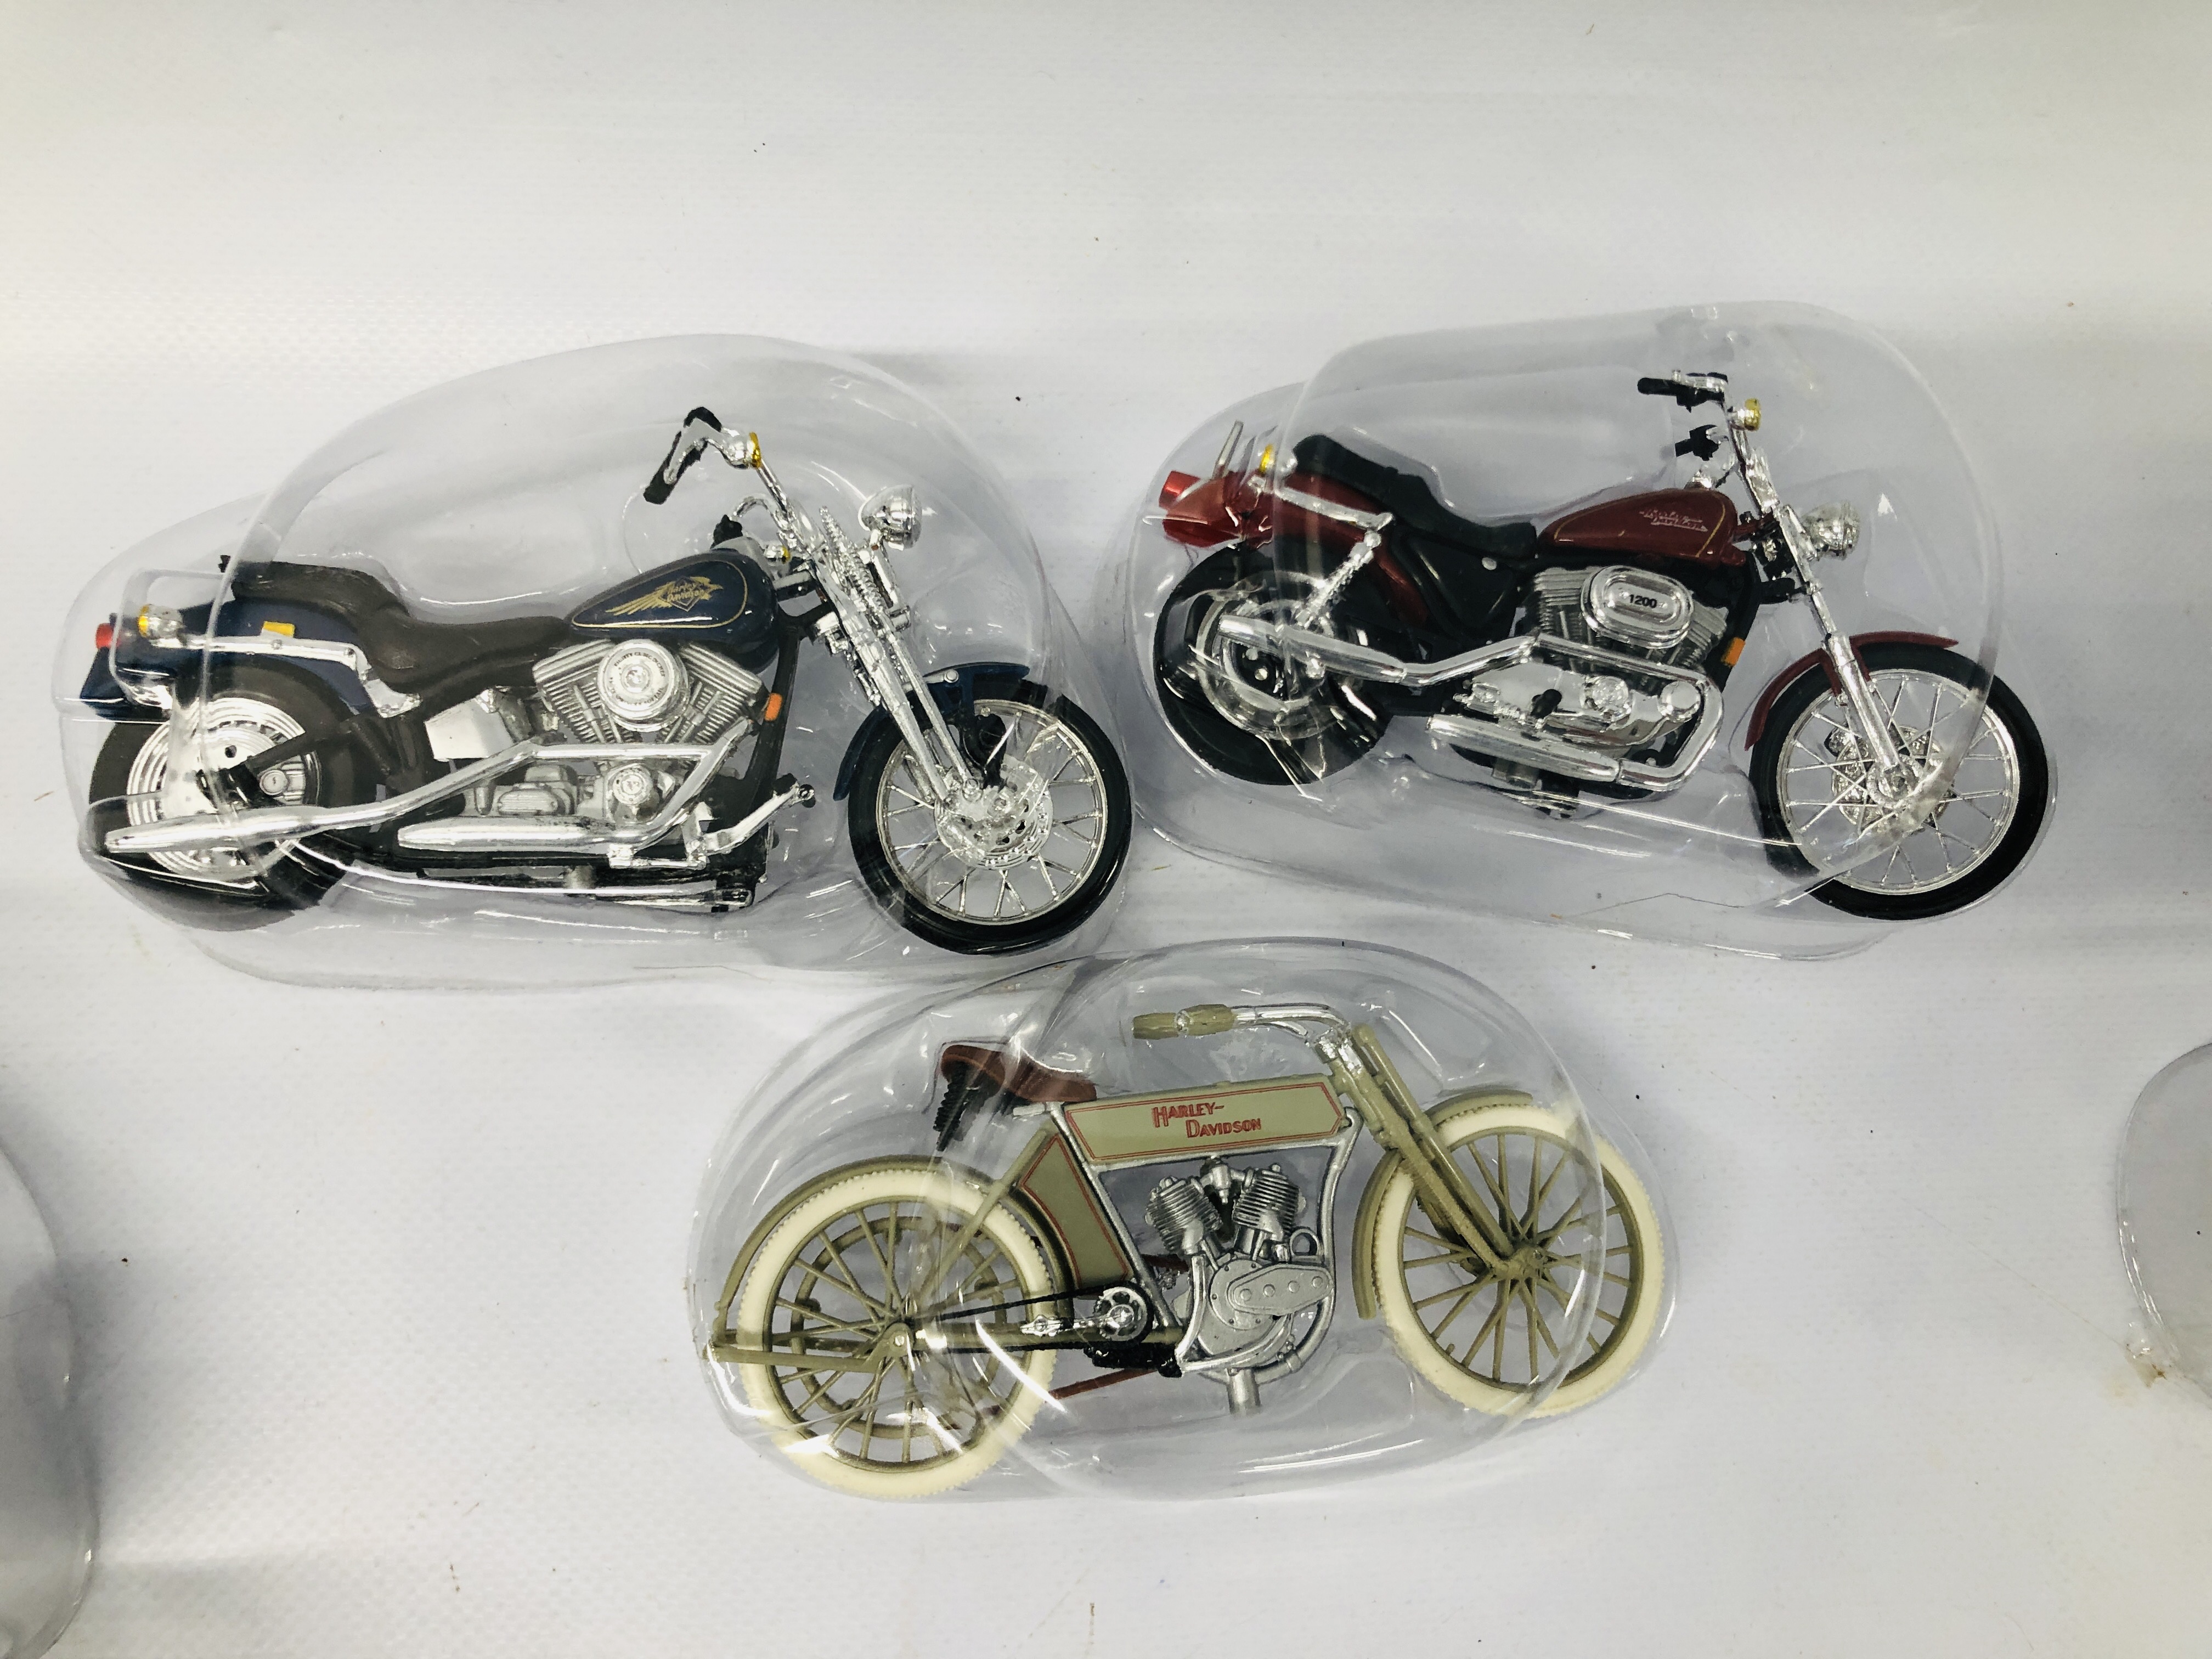 A COMPLETE SET OF 24 HARLEY DAVIDSON MODEL MOTORCYCLES "THE LEGENDS COLLECTION" - Image 6 of 9